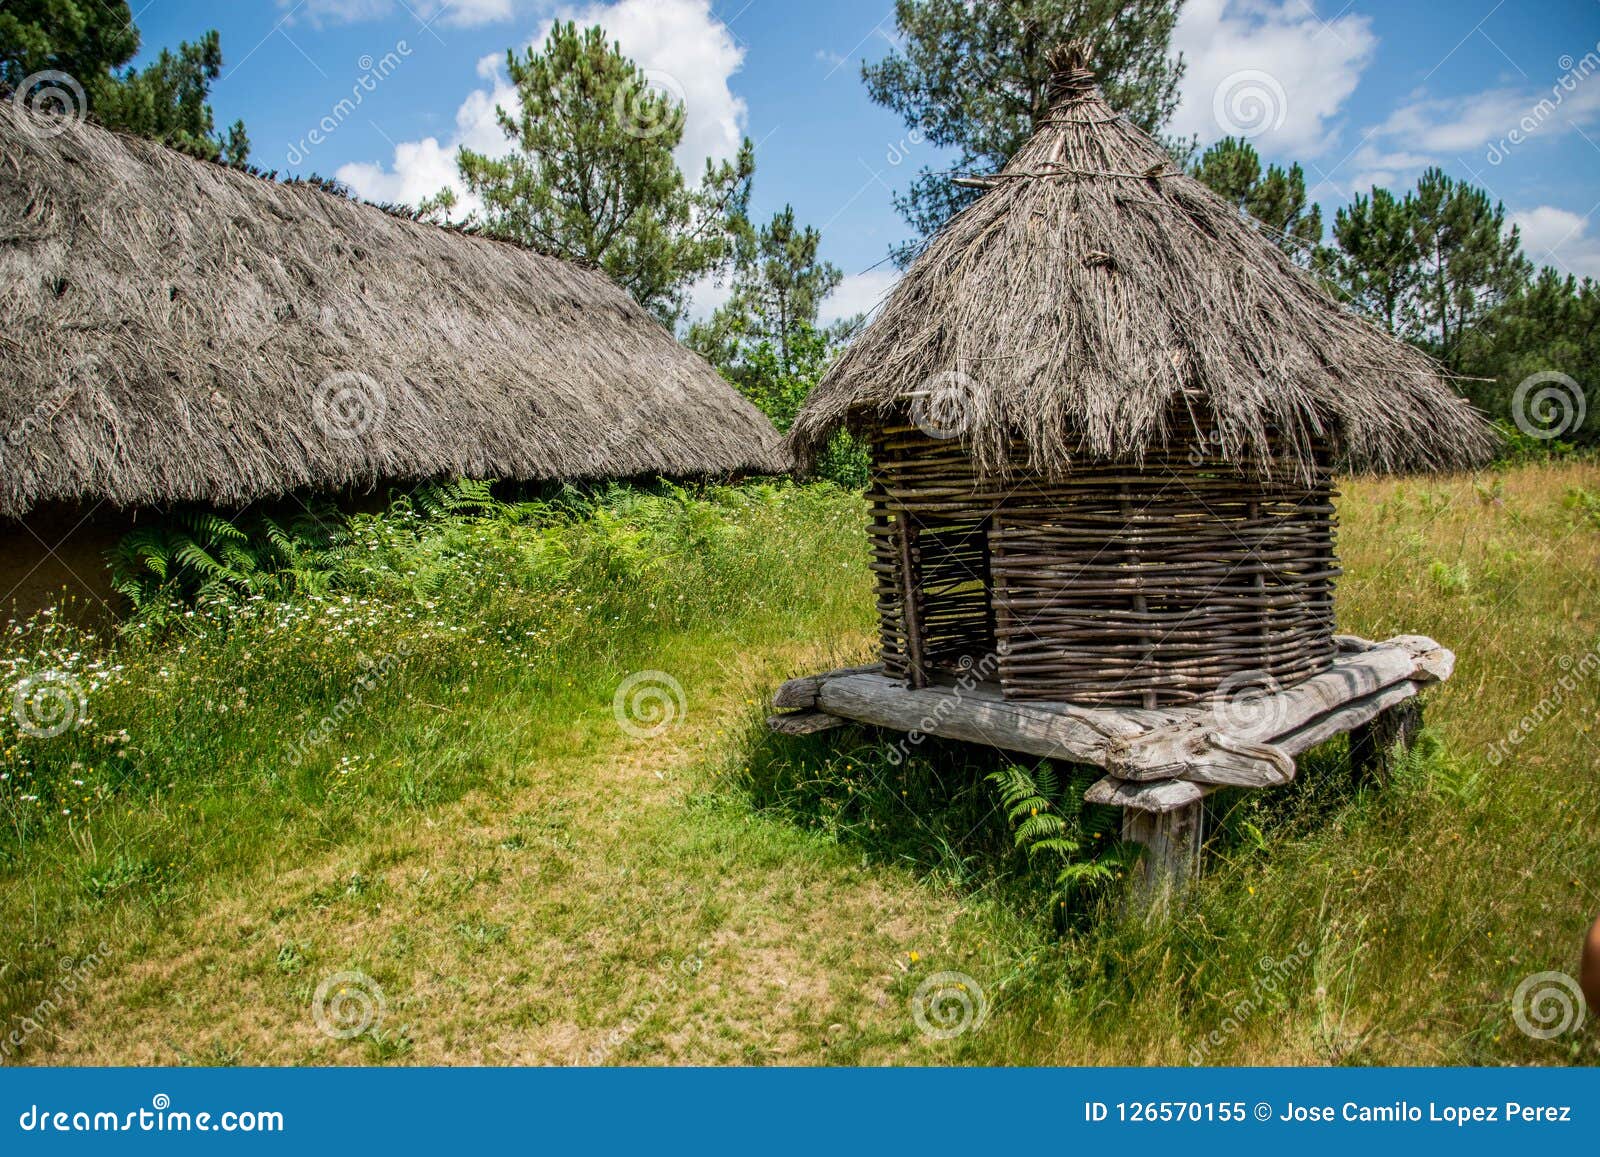 Houses Of A Celtic People In Galicia, Spain Stock Image ...